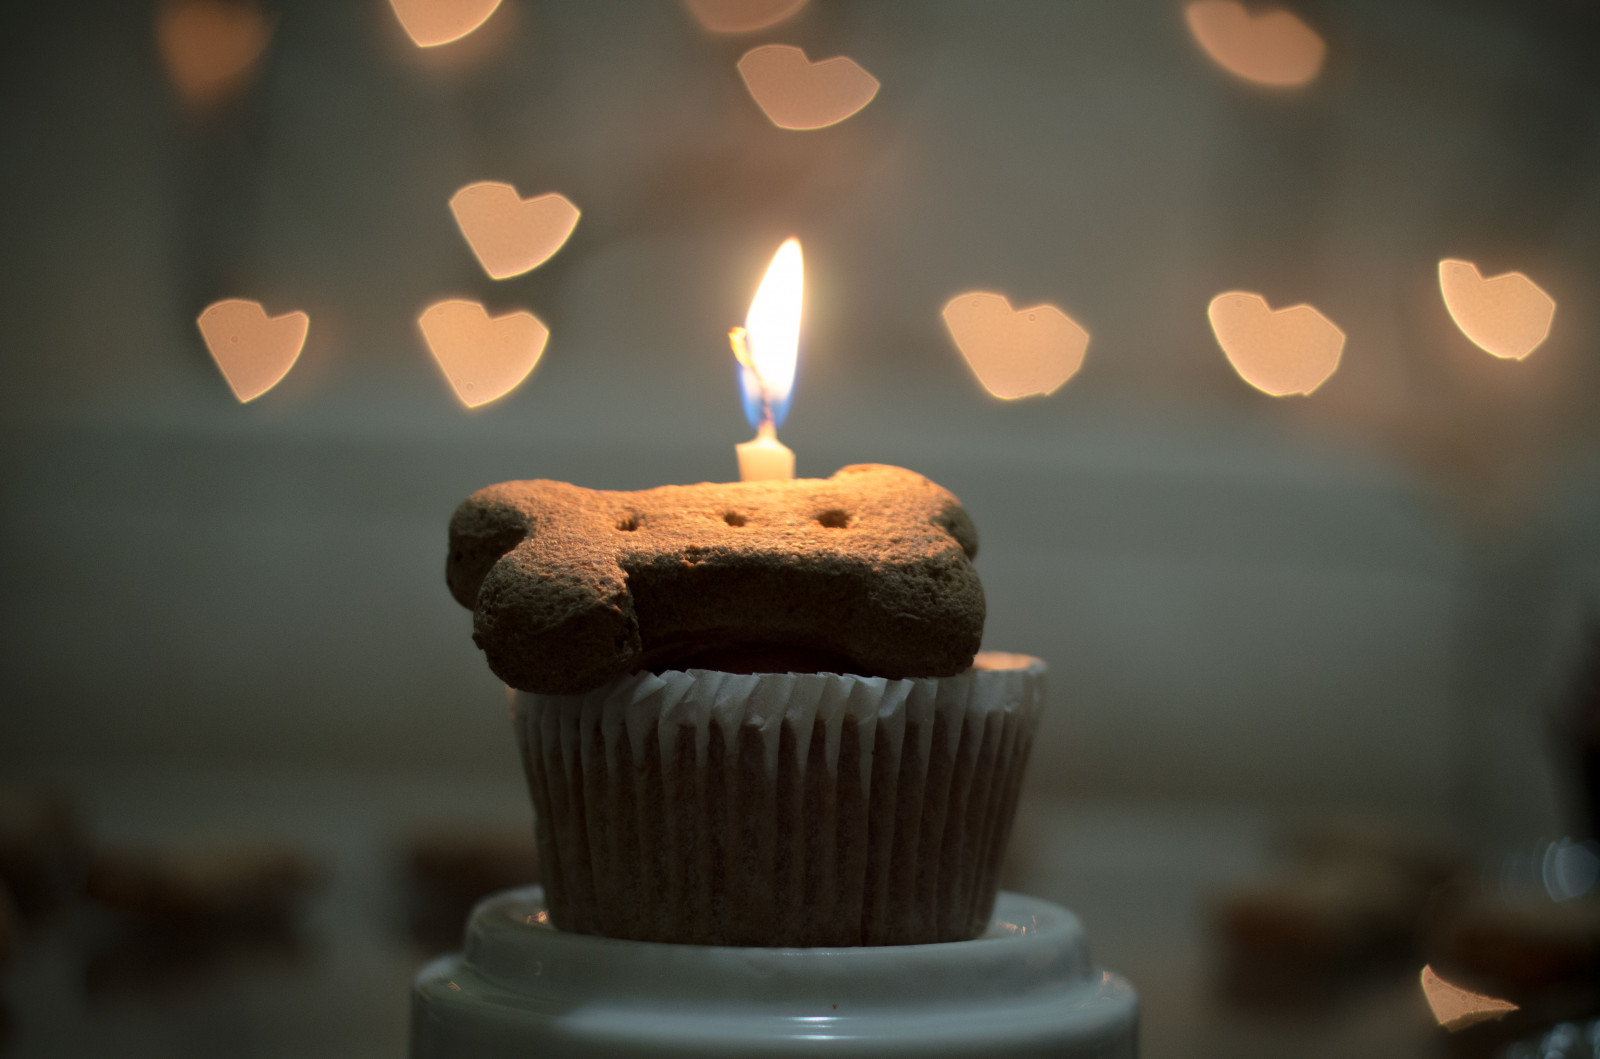 A cupcake with one lit candle on top - Birthday